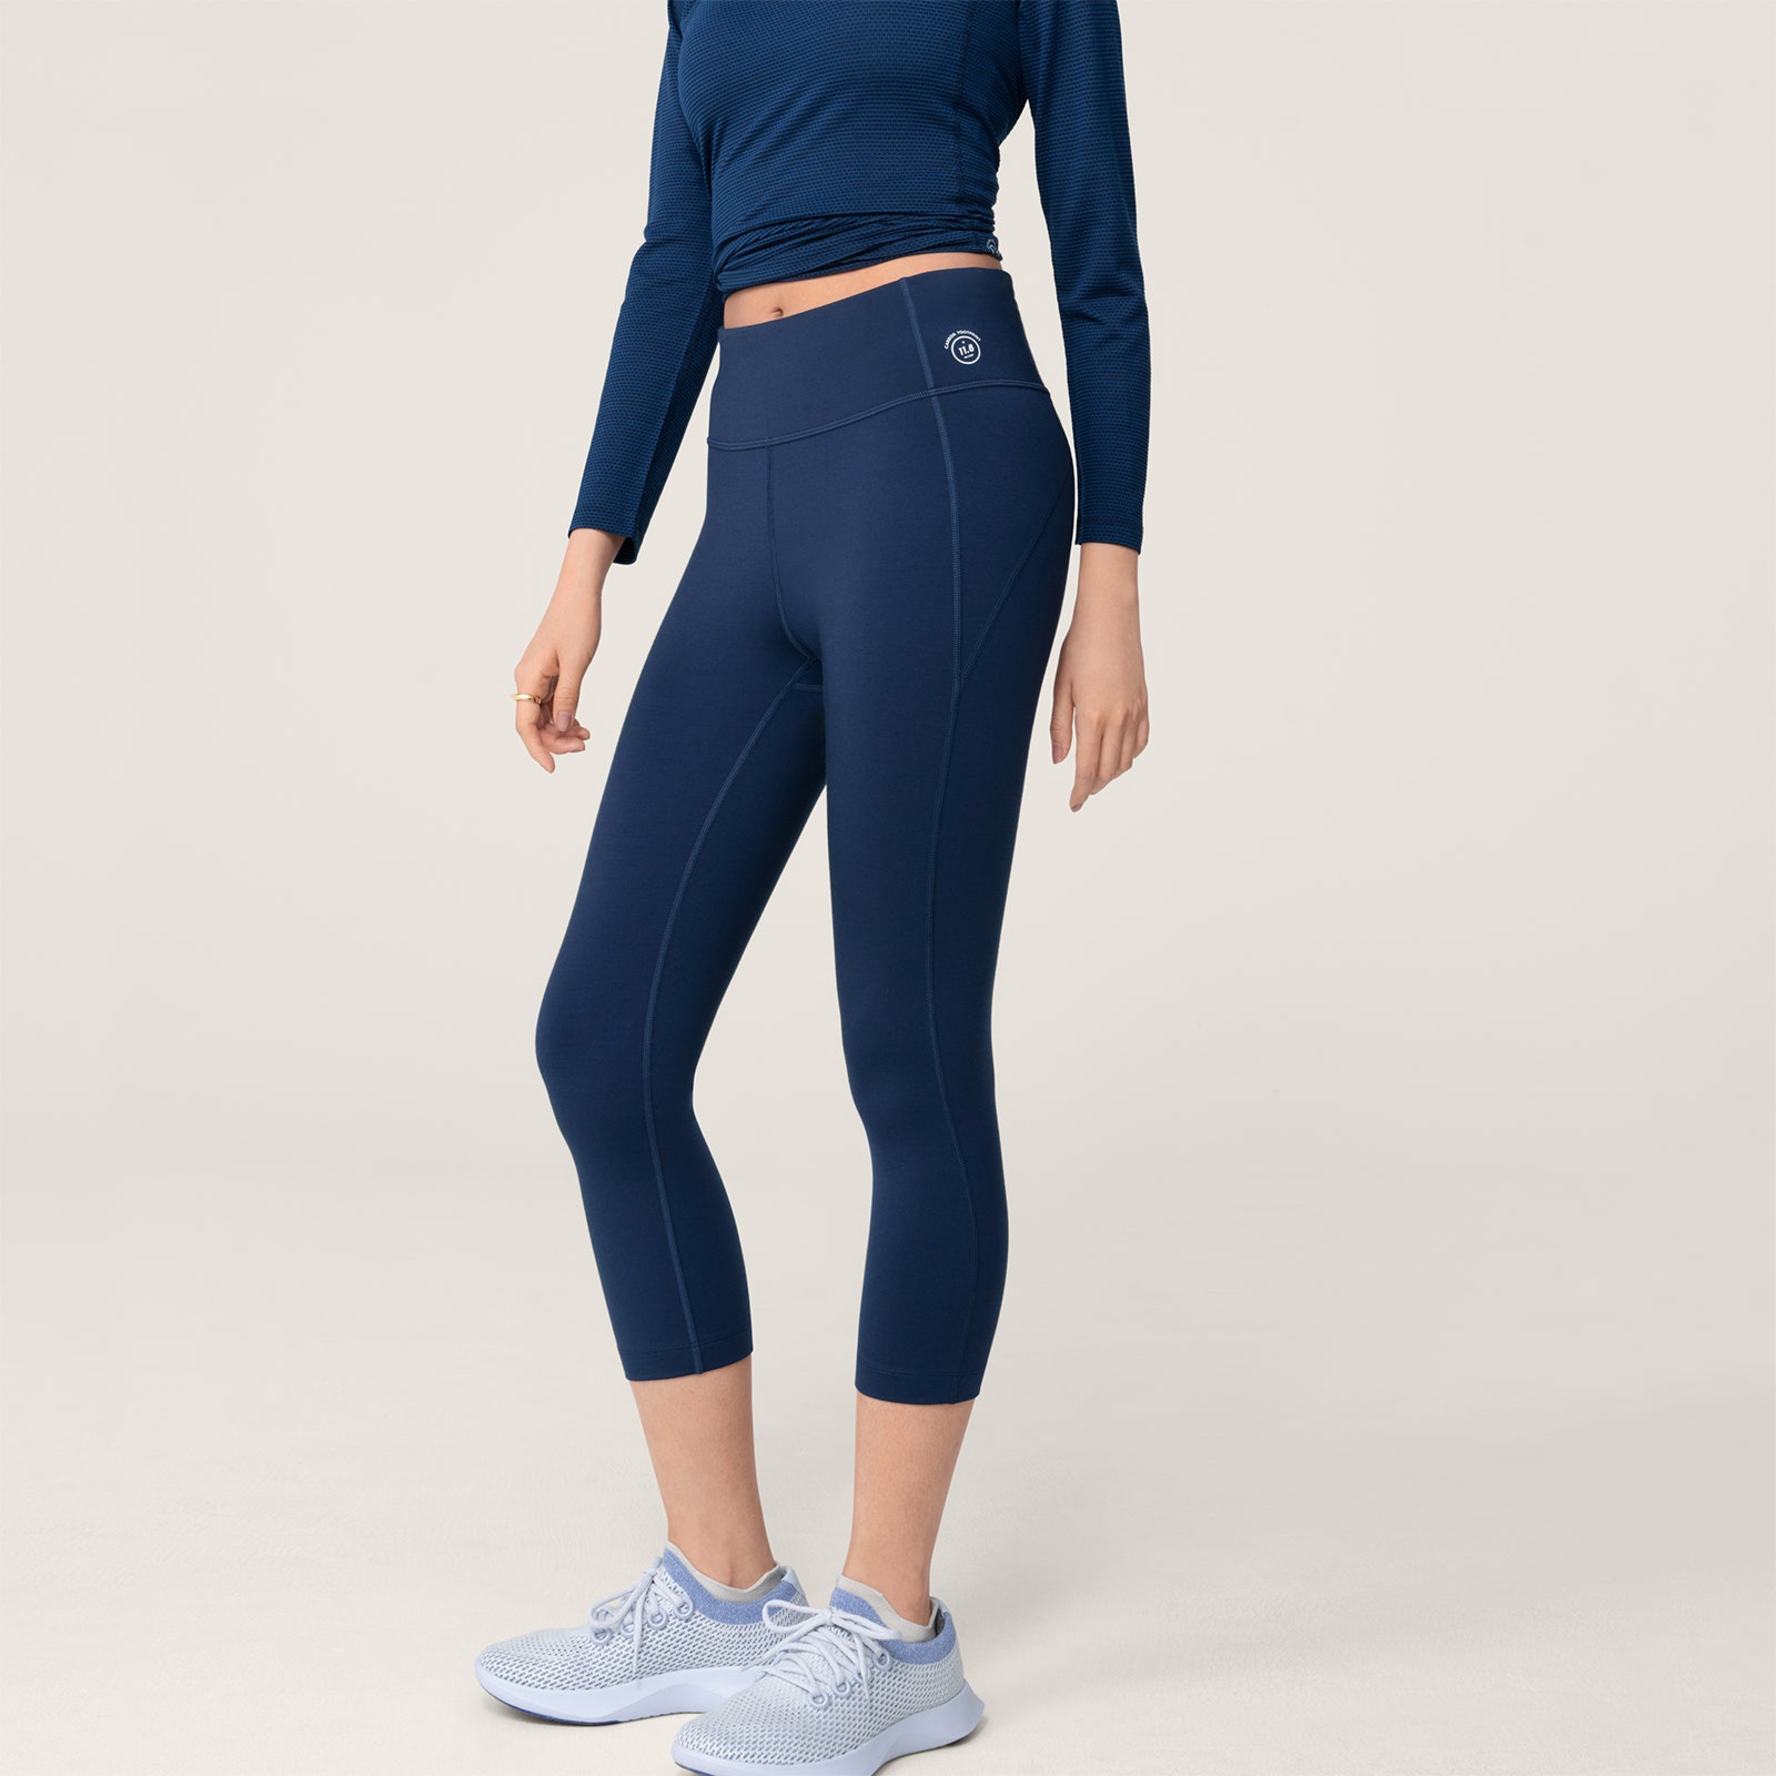 Yoga clothes made from organic wool - Dilling